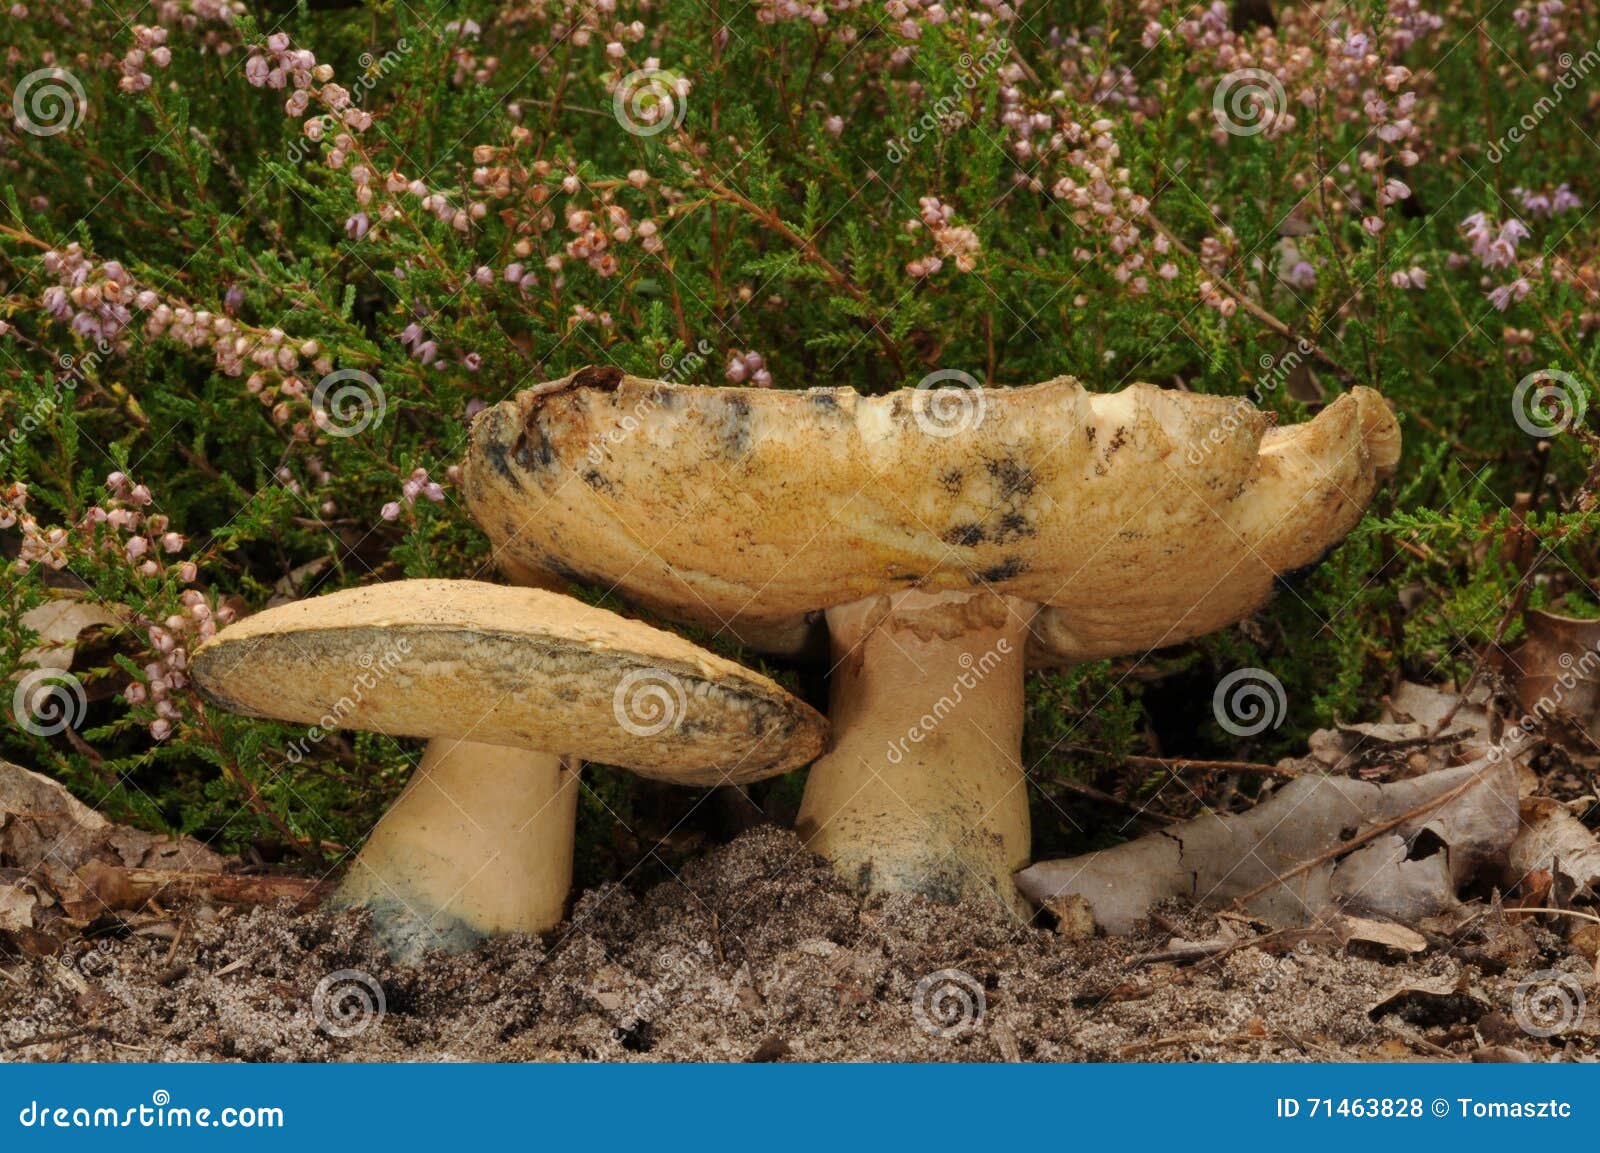 gyroporus cyanescens, commonly known as the bluing bolete or the cornflower bolete